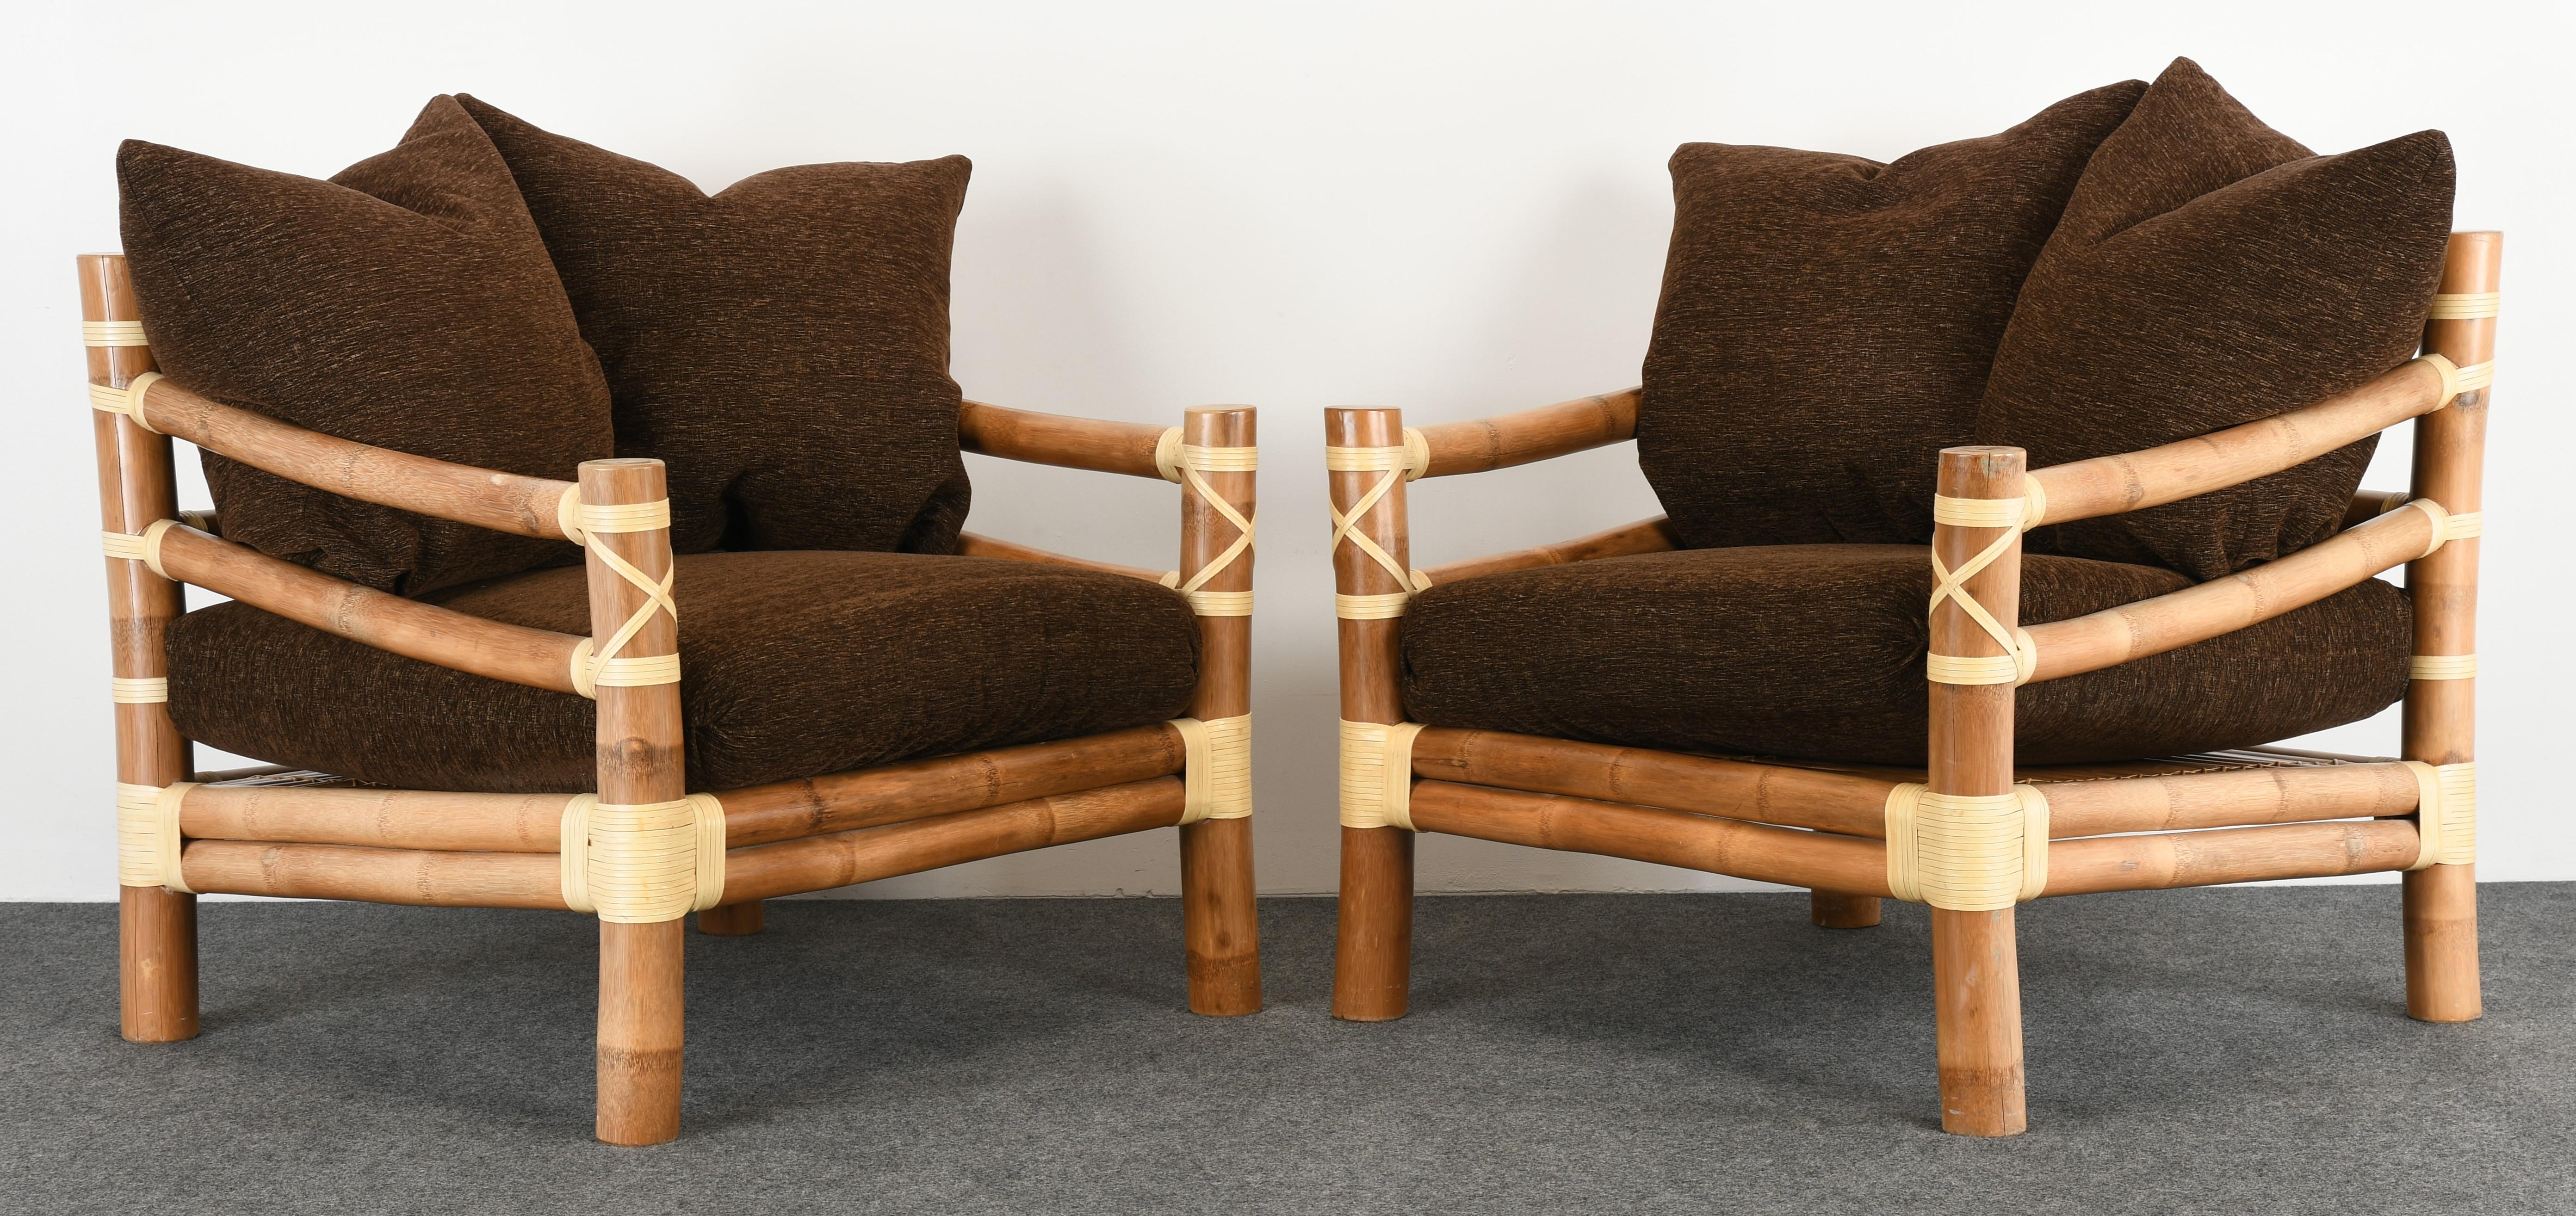 A wonderful pair of large-scale bamboo lounge chairs wrapped with leather accents. These chairs are reminiscent and have the quality of McGuire Furniture. The cushions add a lot of comfort and are overall in good vintage condition. The leather